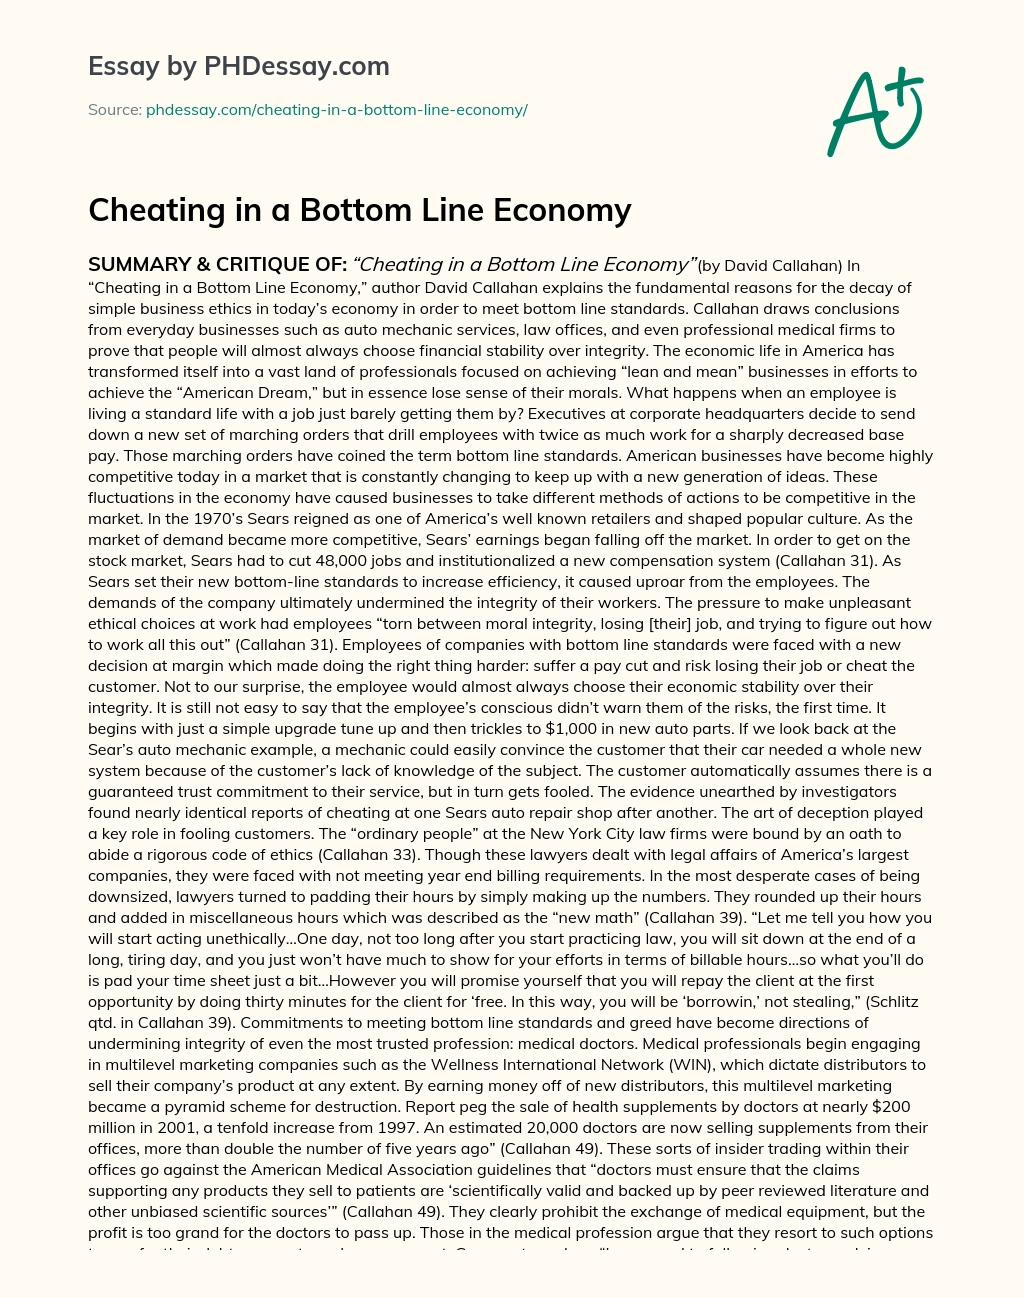 Cheating in a Bottom Line Economy essay